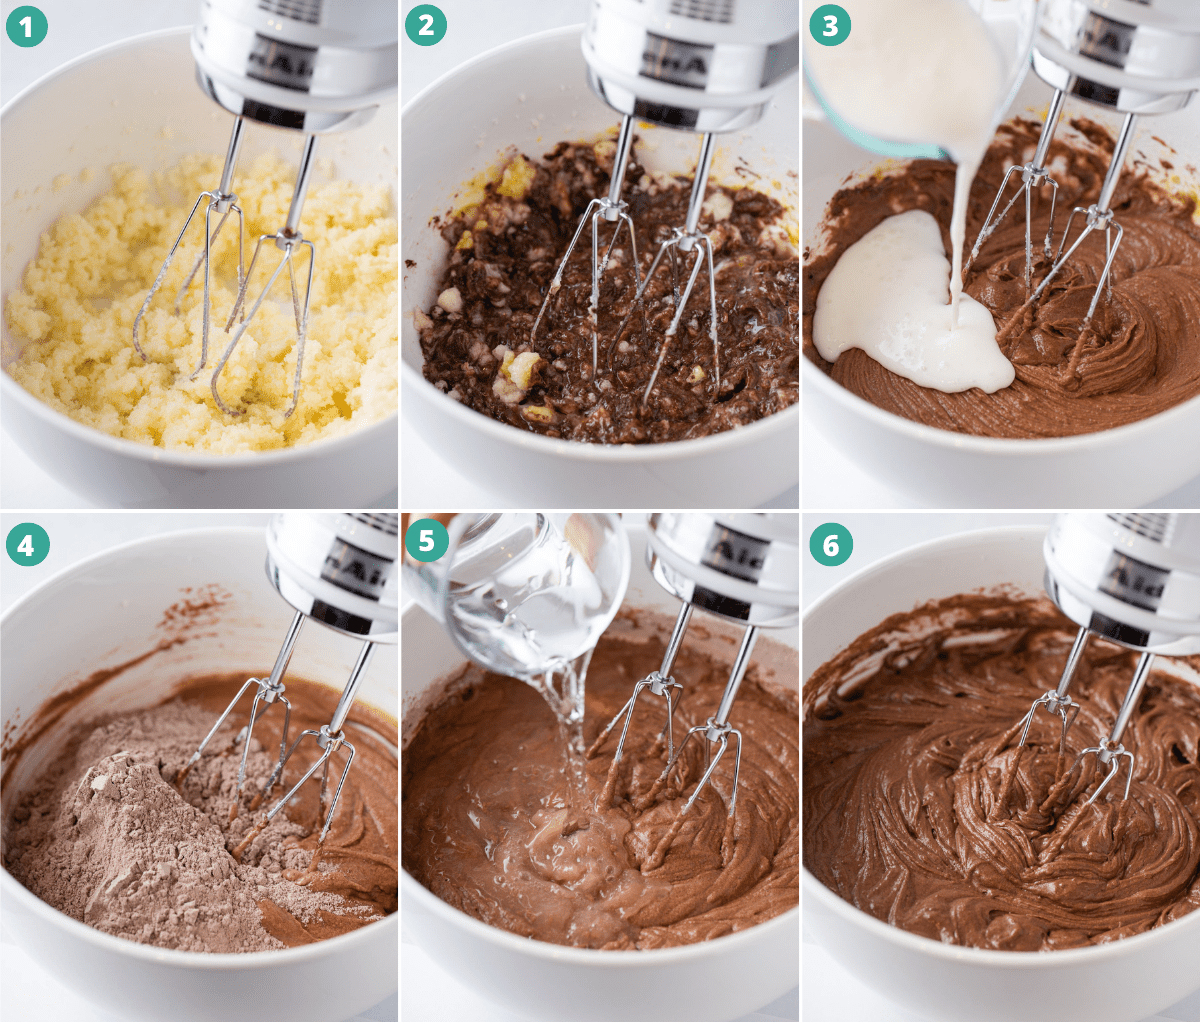 6 photos showing process of making gluten-free chocolate cupcakes